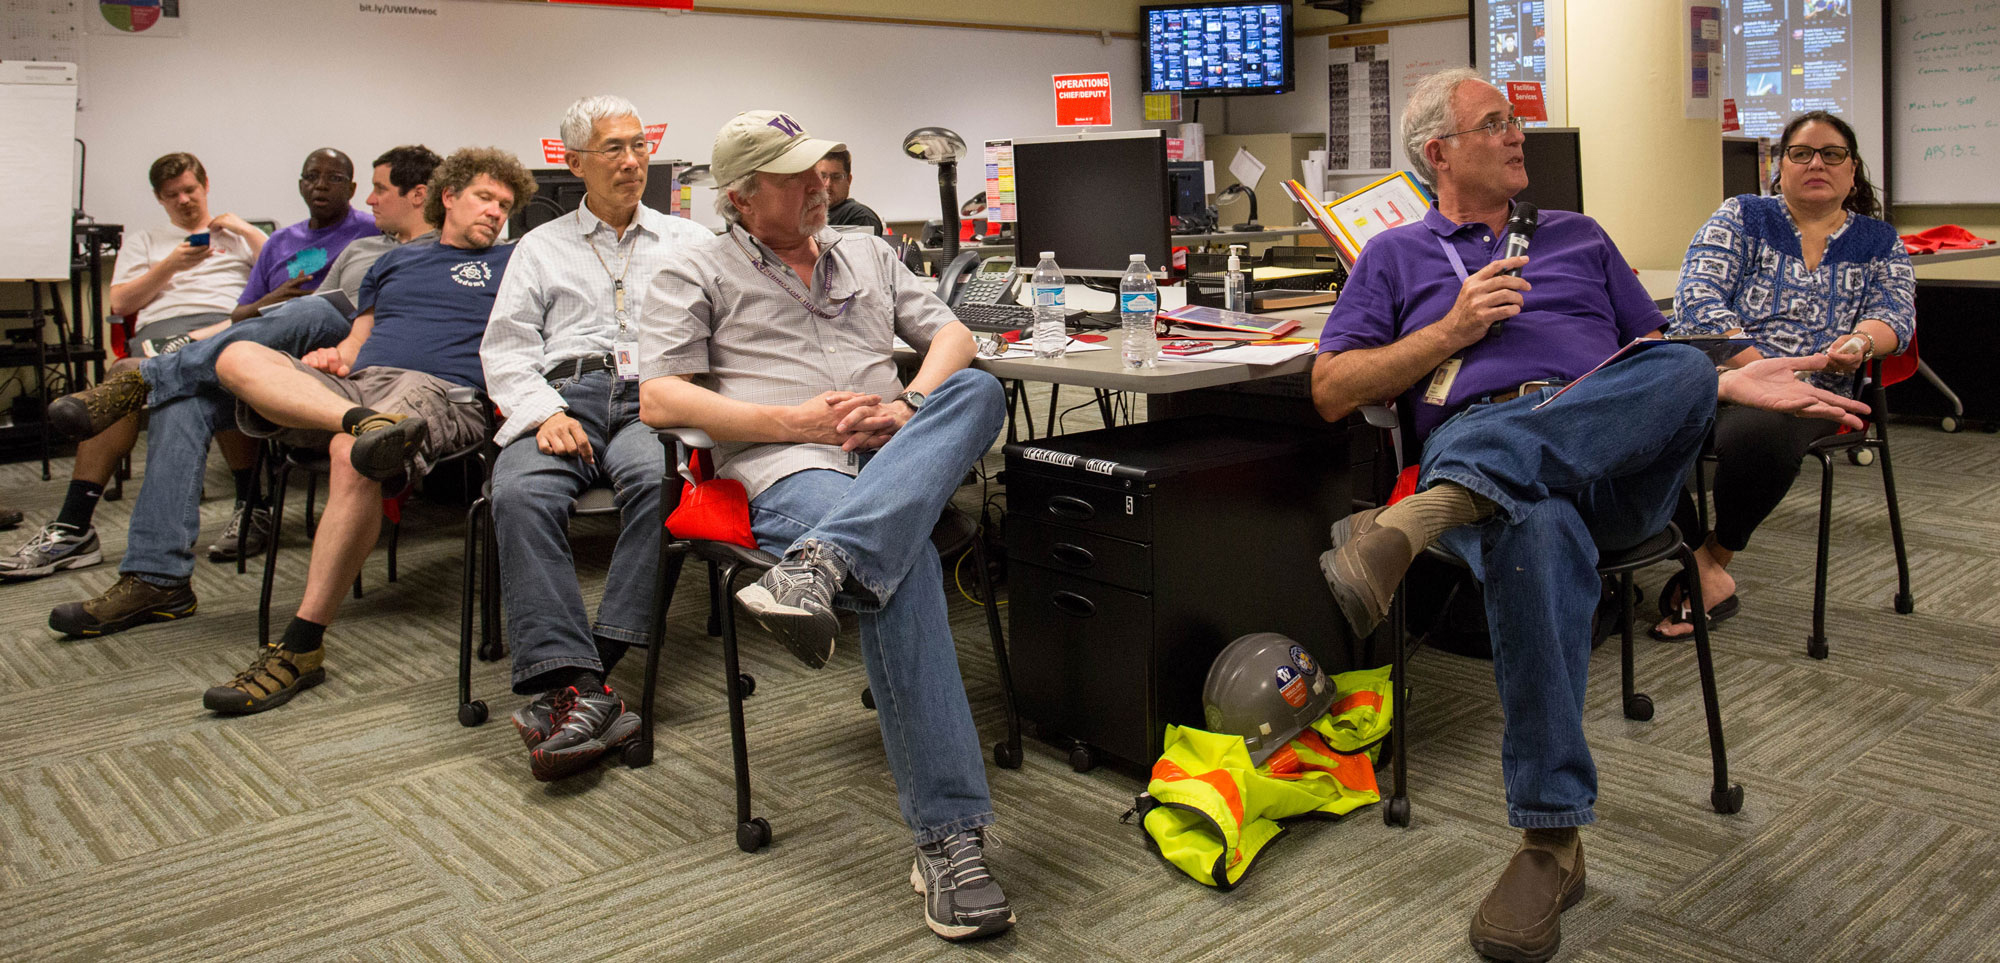 Cascadia Rising drill participants gather in the University's Emergency Operations Center to collect feedback and lessons learned.